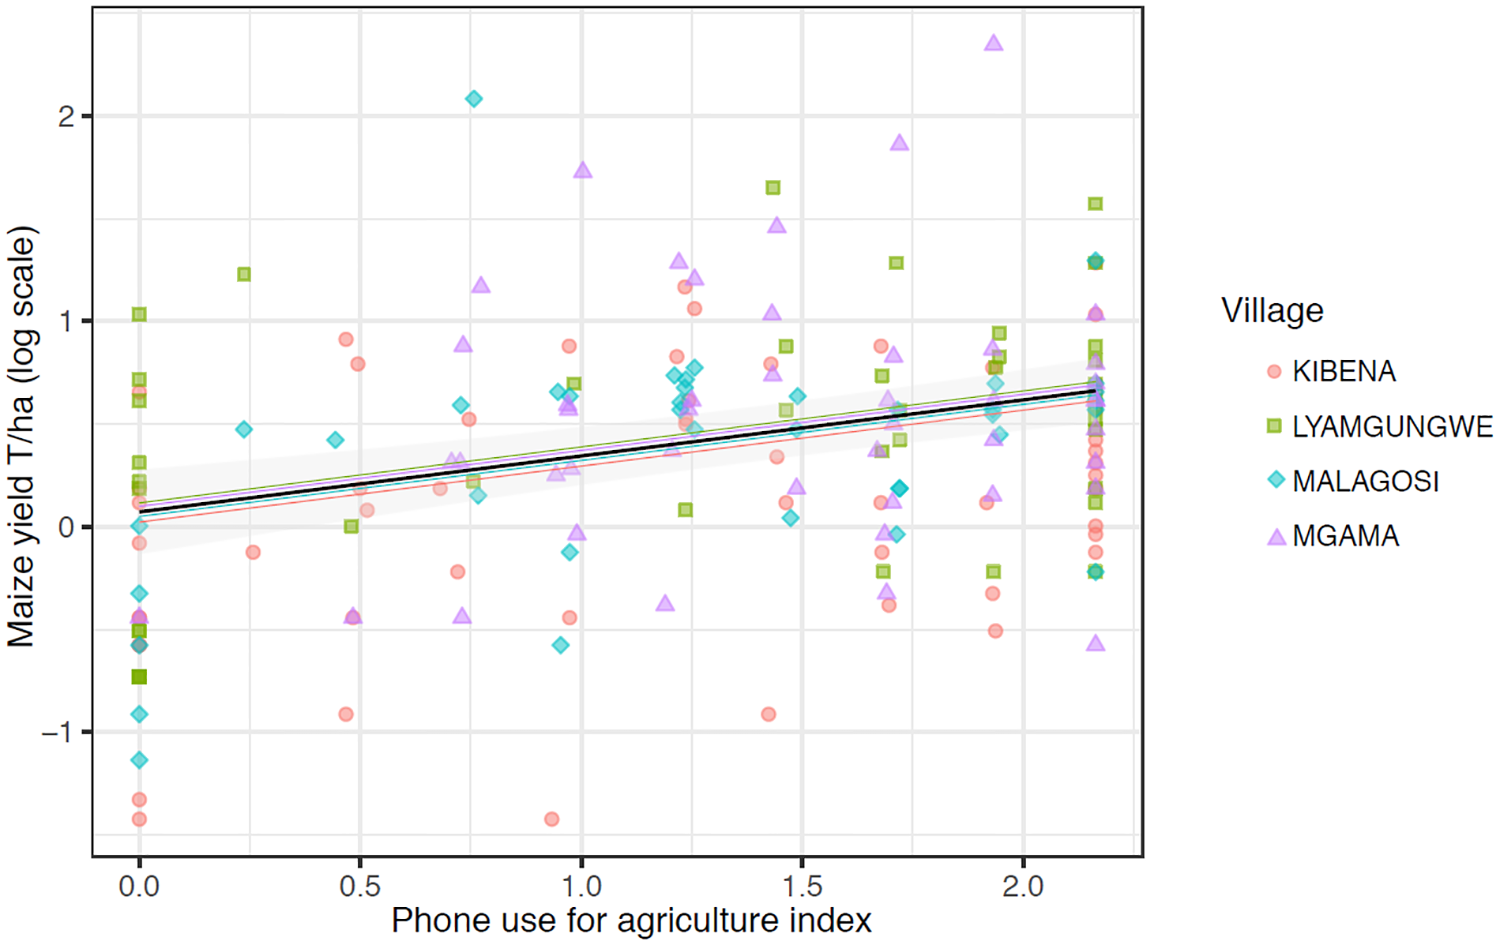 Mobile phone use is associated with higher smallholder agricultural productivity in Tanzania, East A